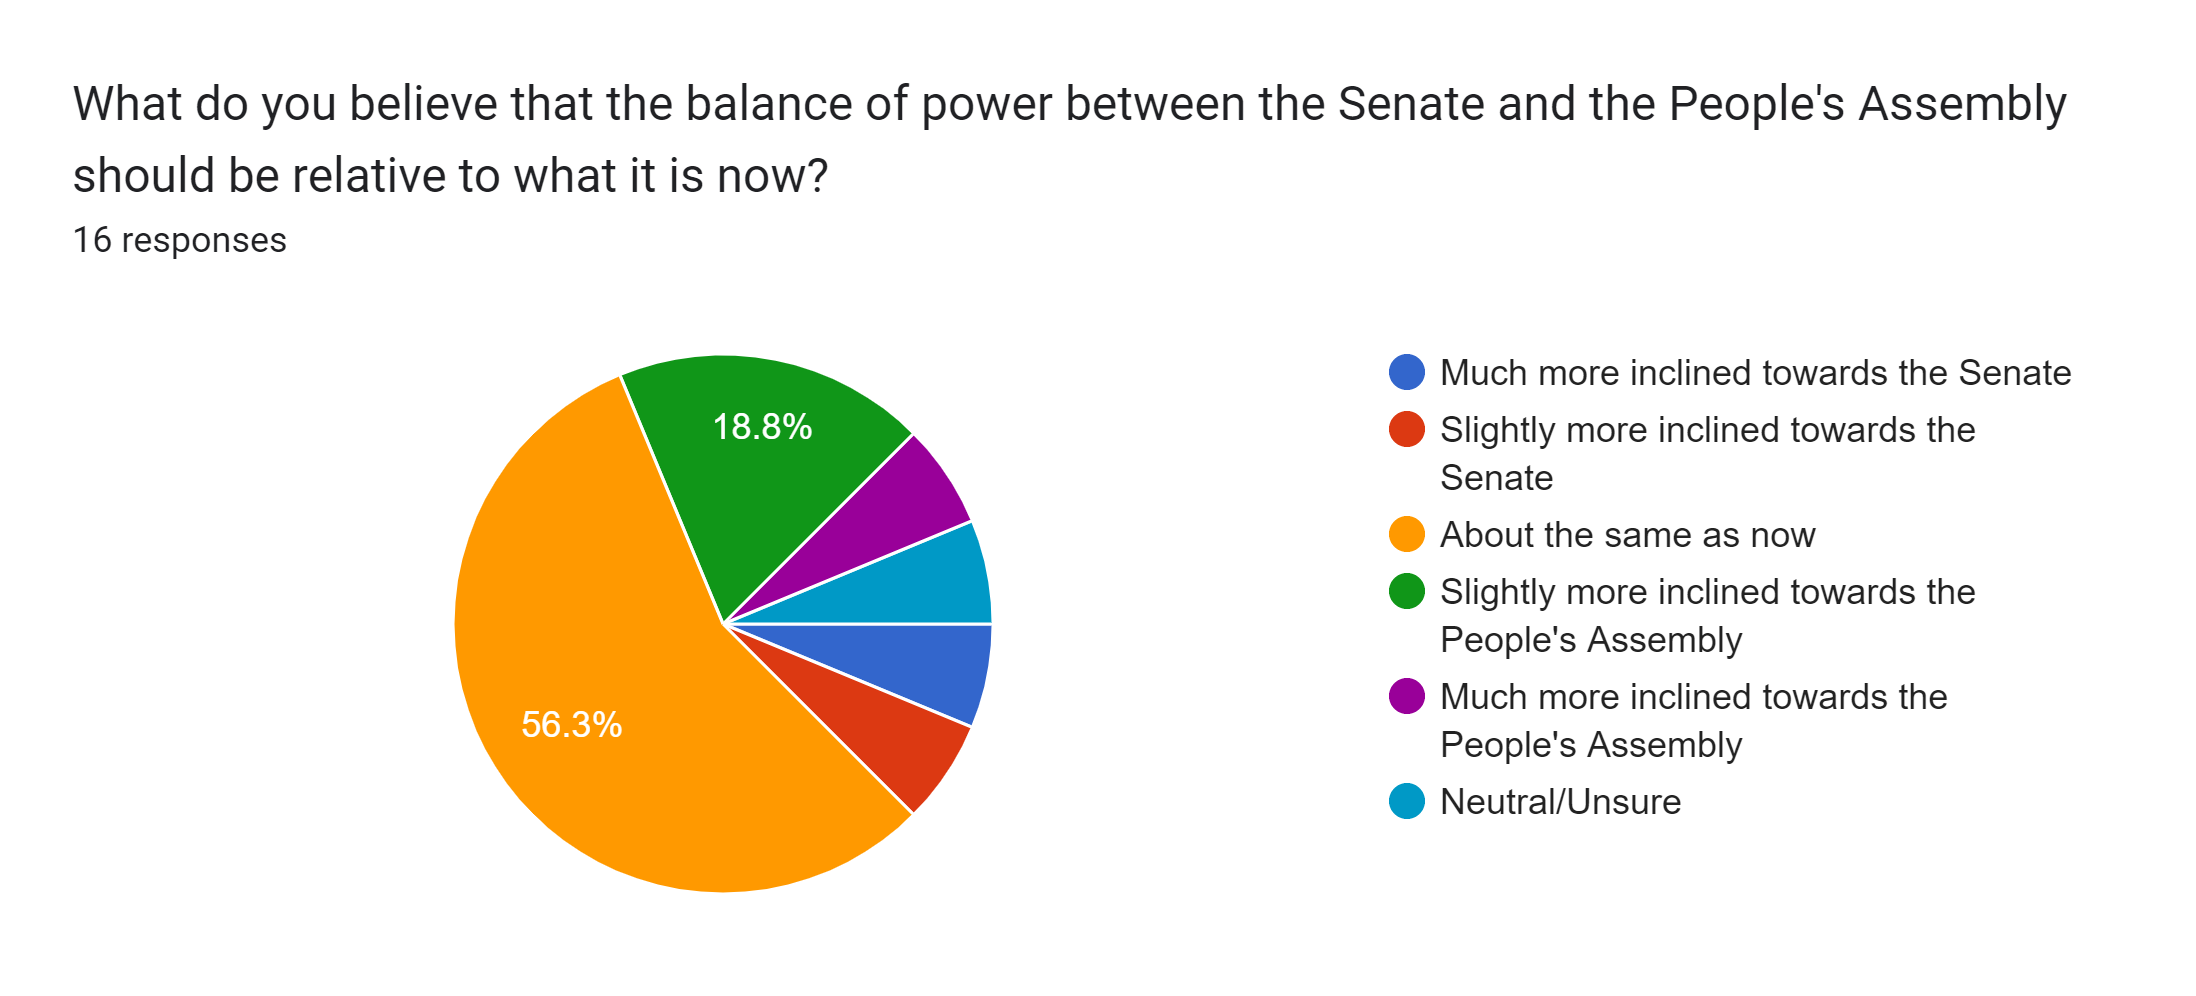 Forms response chart. Question title: What do you believe that the balance of power between the Senate and the People's Assembly should be relative to what it is now?. Number of responses: 16 responses.